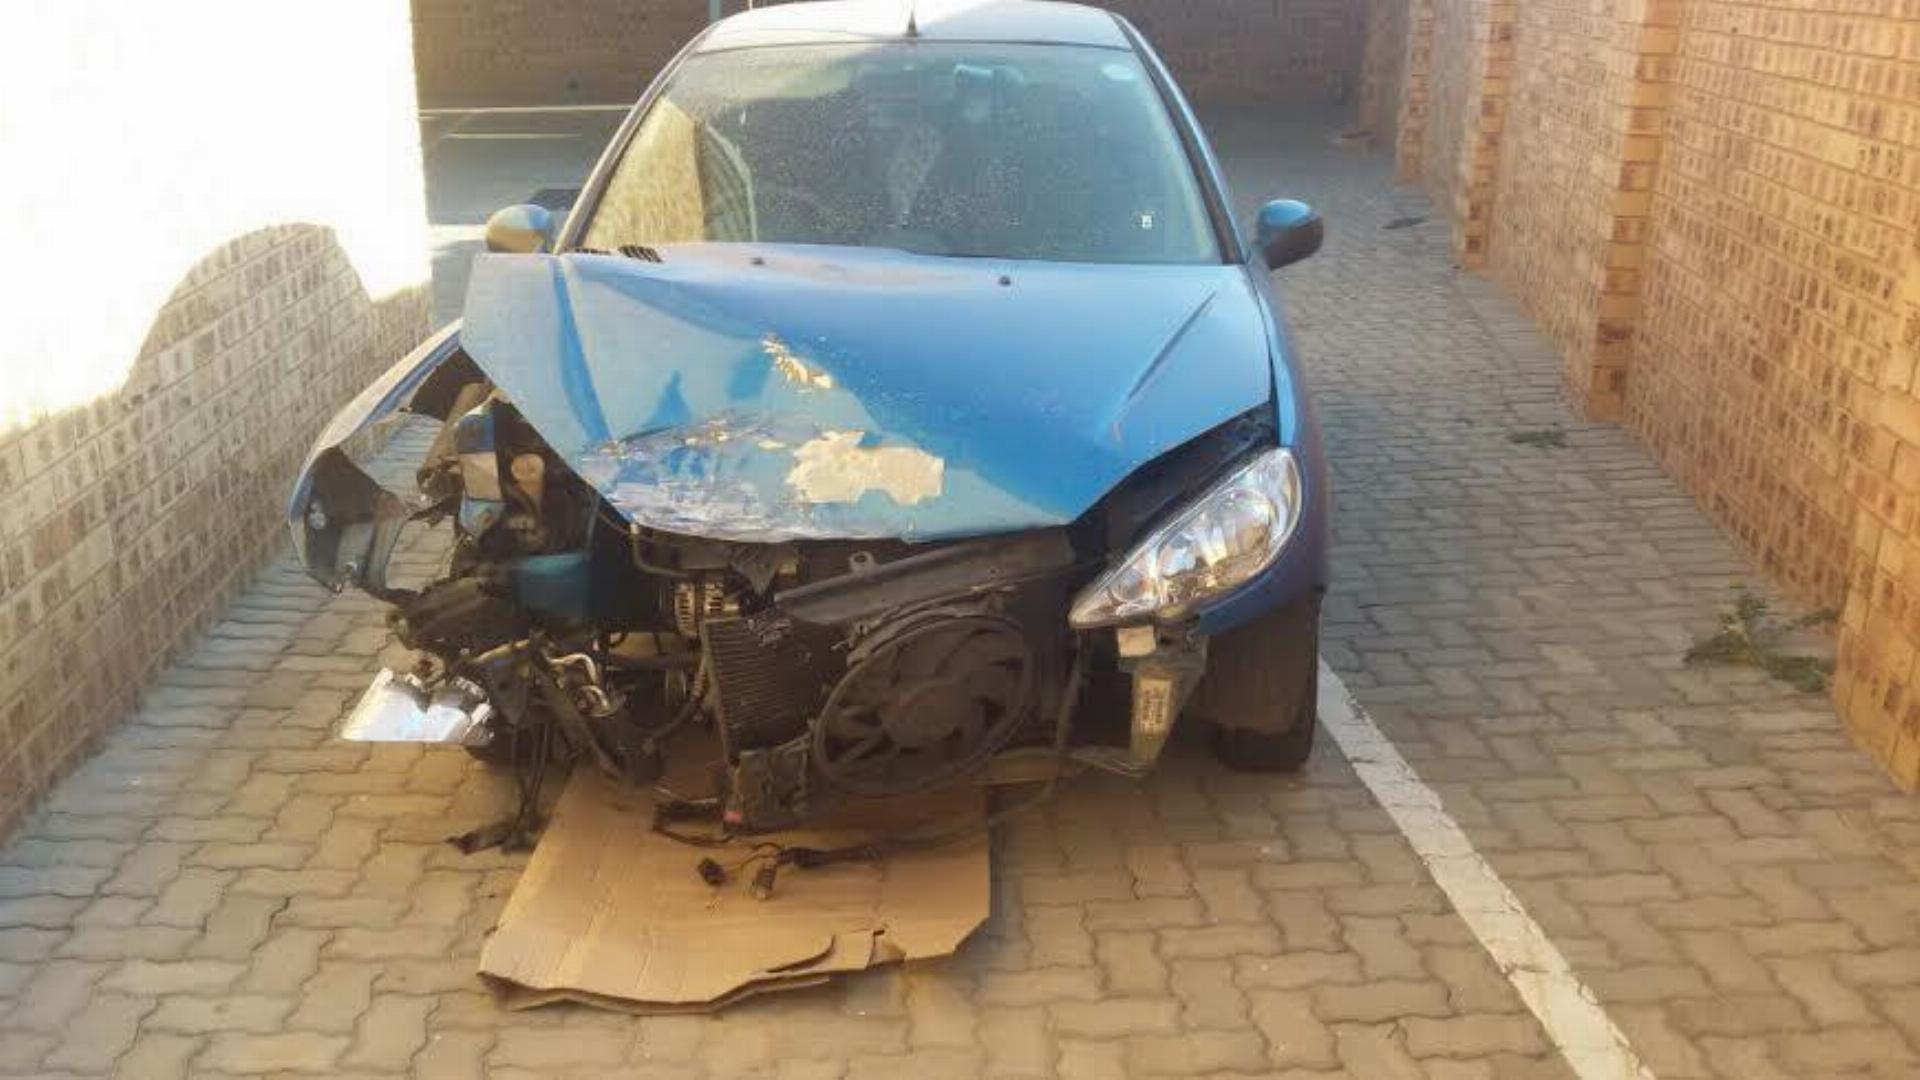 Peugeot 206 Good CONDITION. Accident IN Front And Right Vender